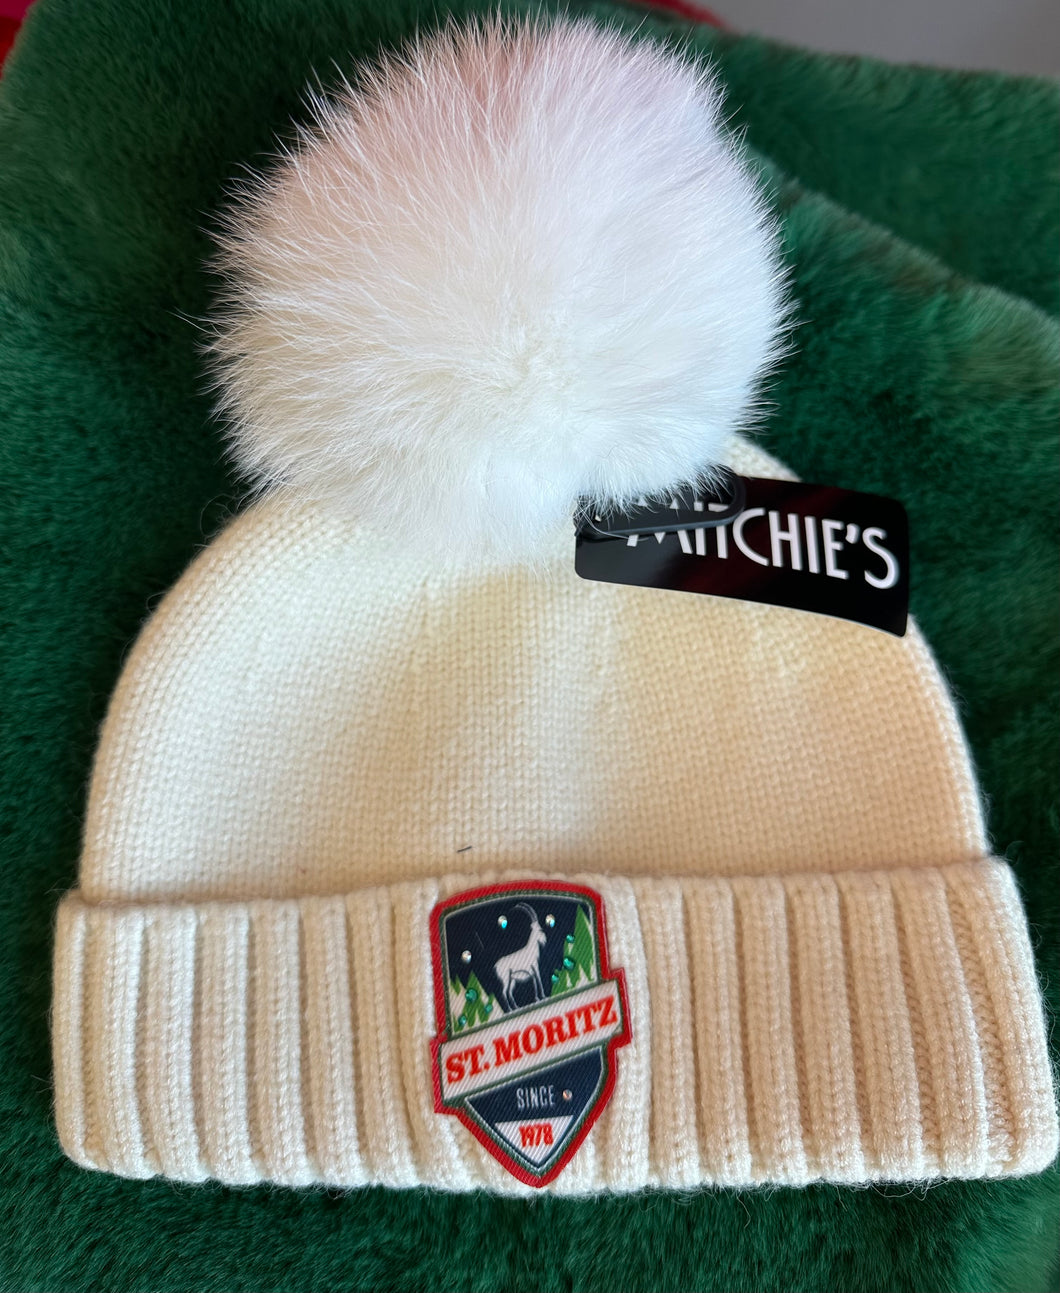 Mitchie’s Ivory Hat with St.Moritz Patch and Ivory Pom